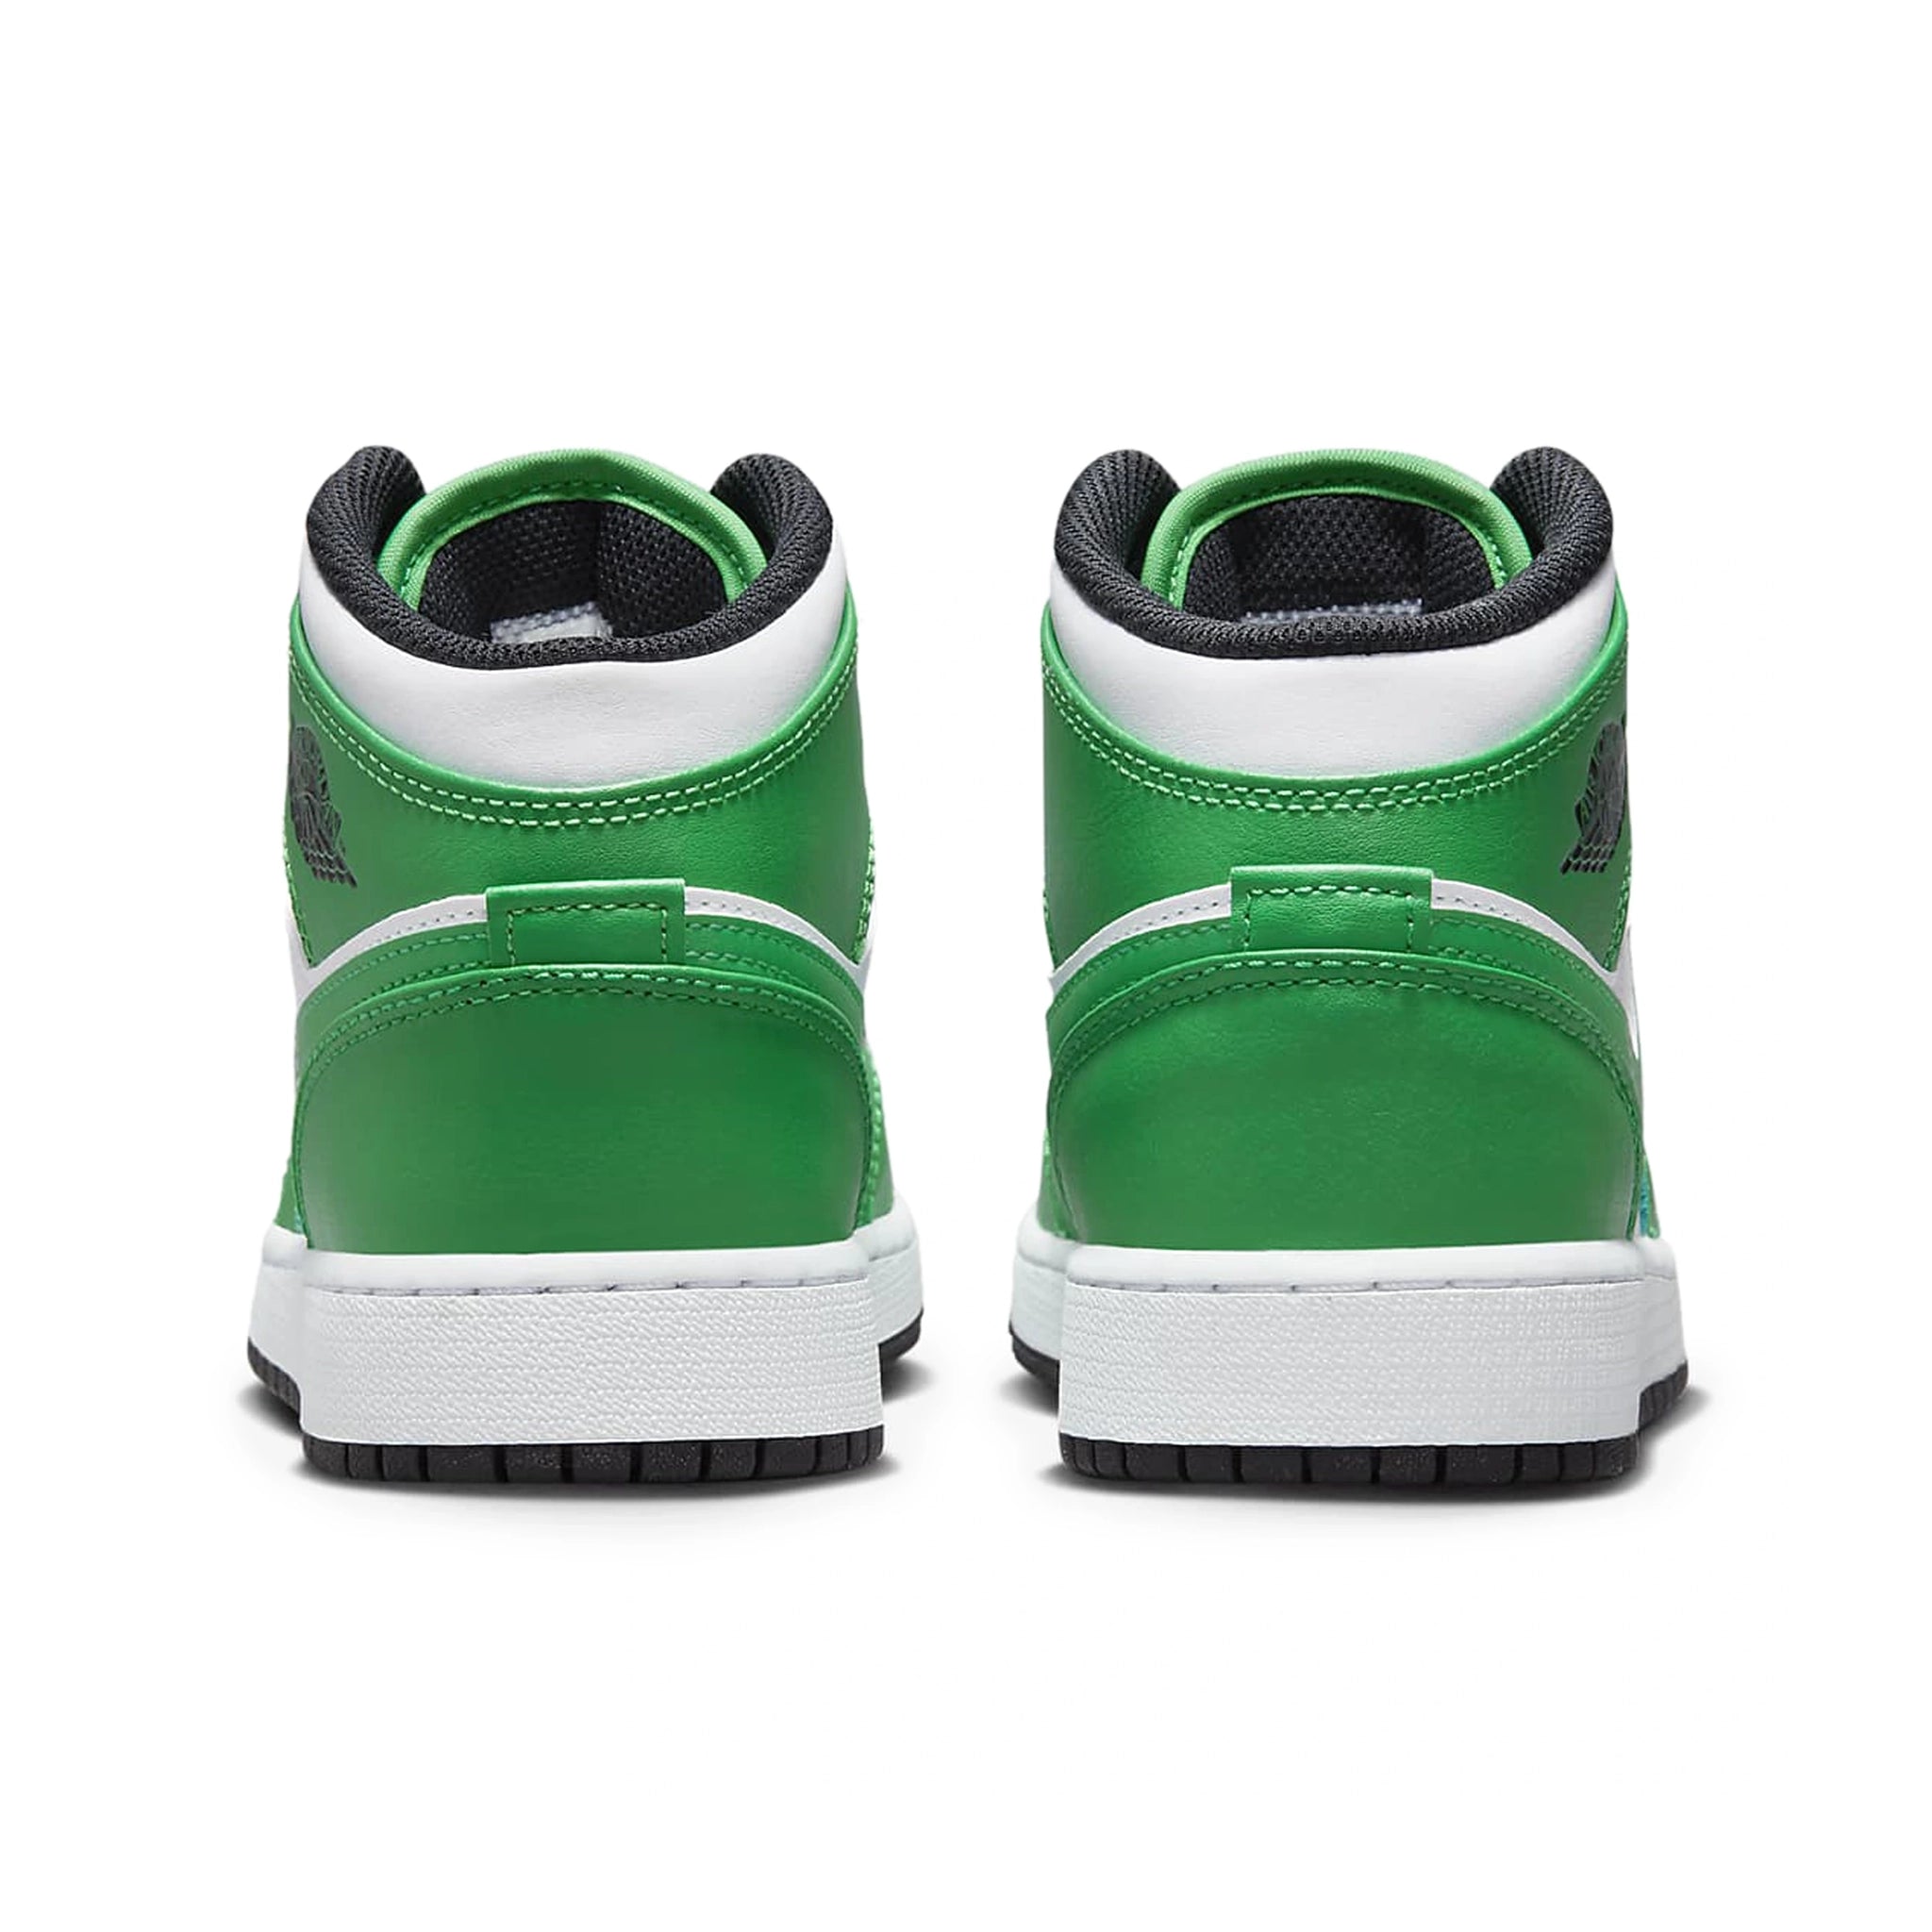 Back view of Air Jordan 1 Mid Lucky Green (GS) DQ8423-301